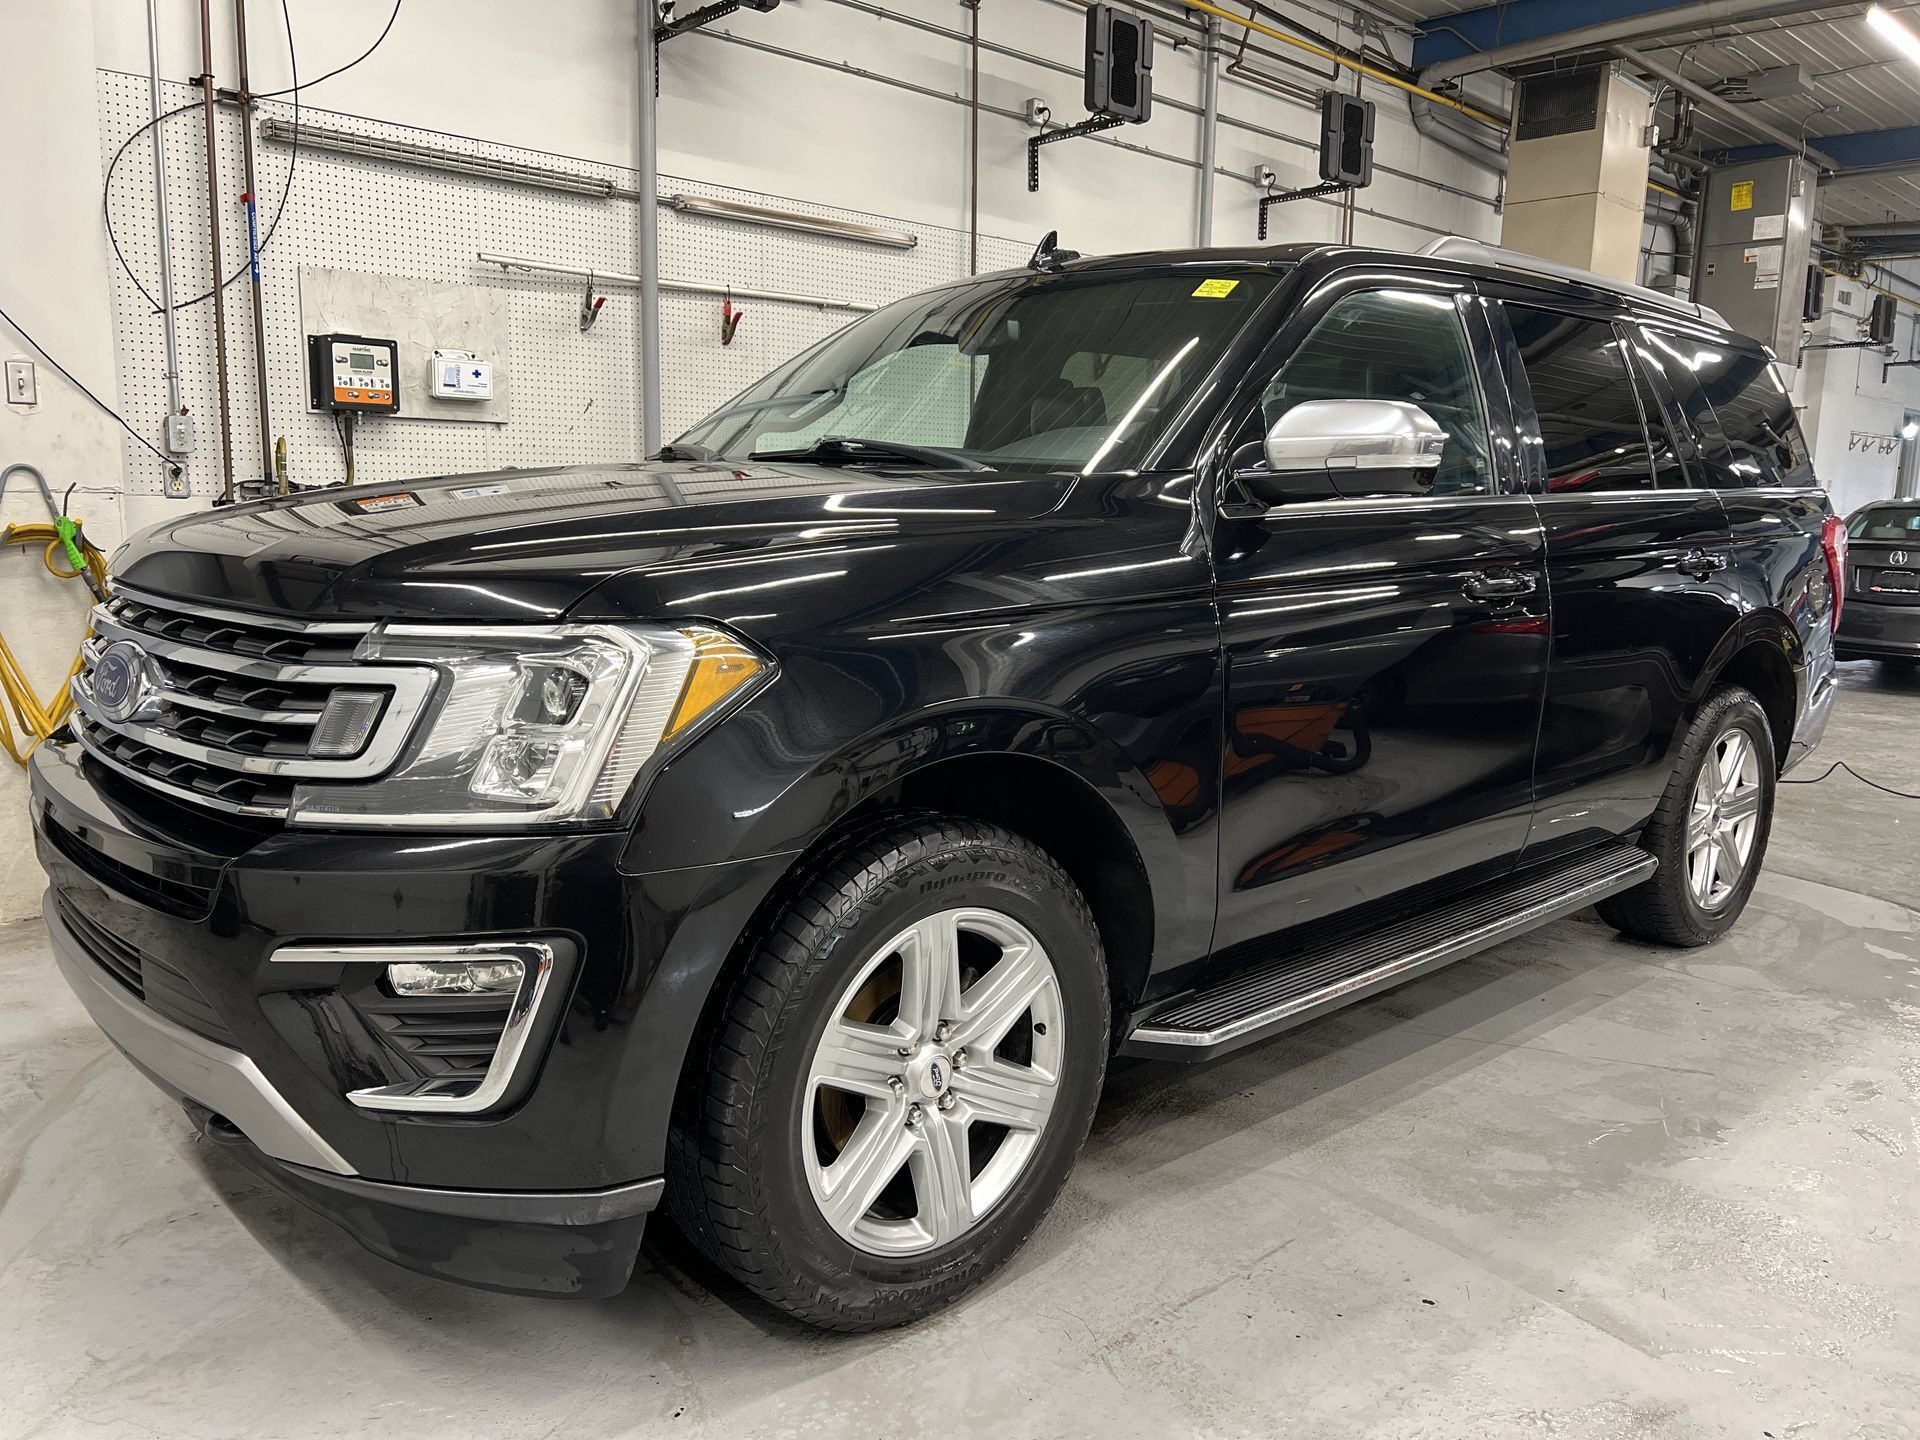 2019 Ford Expedition XLT 4x4| 8-PASS| PANO ROOF| LEATHER| NAV | TOW PKG